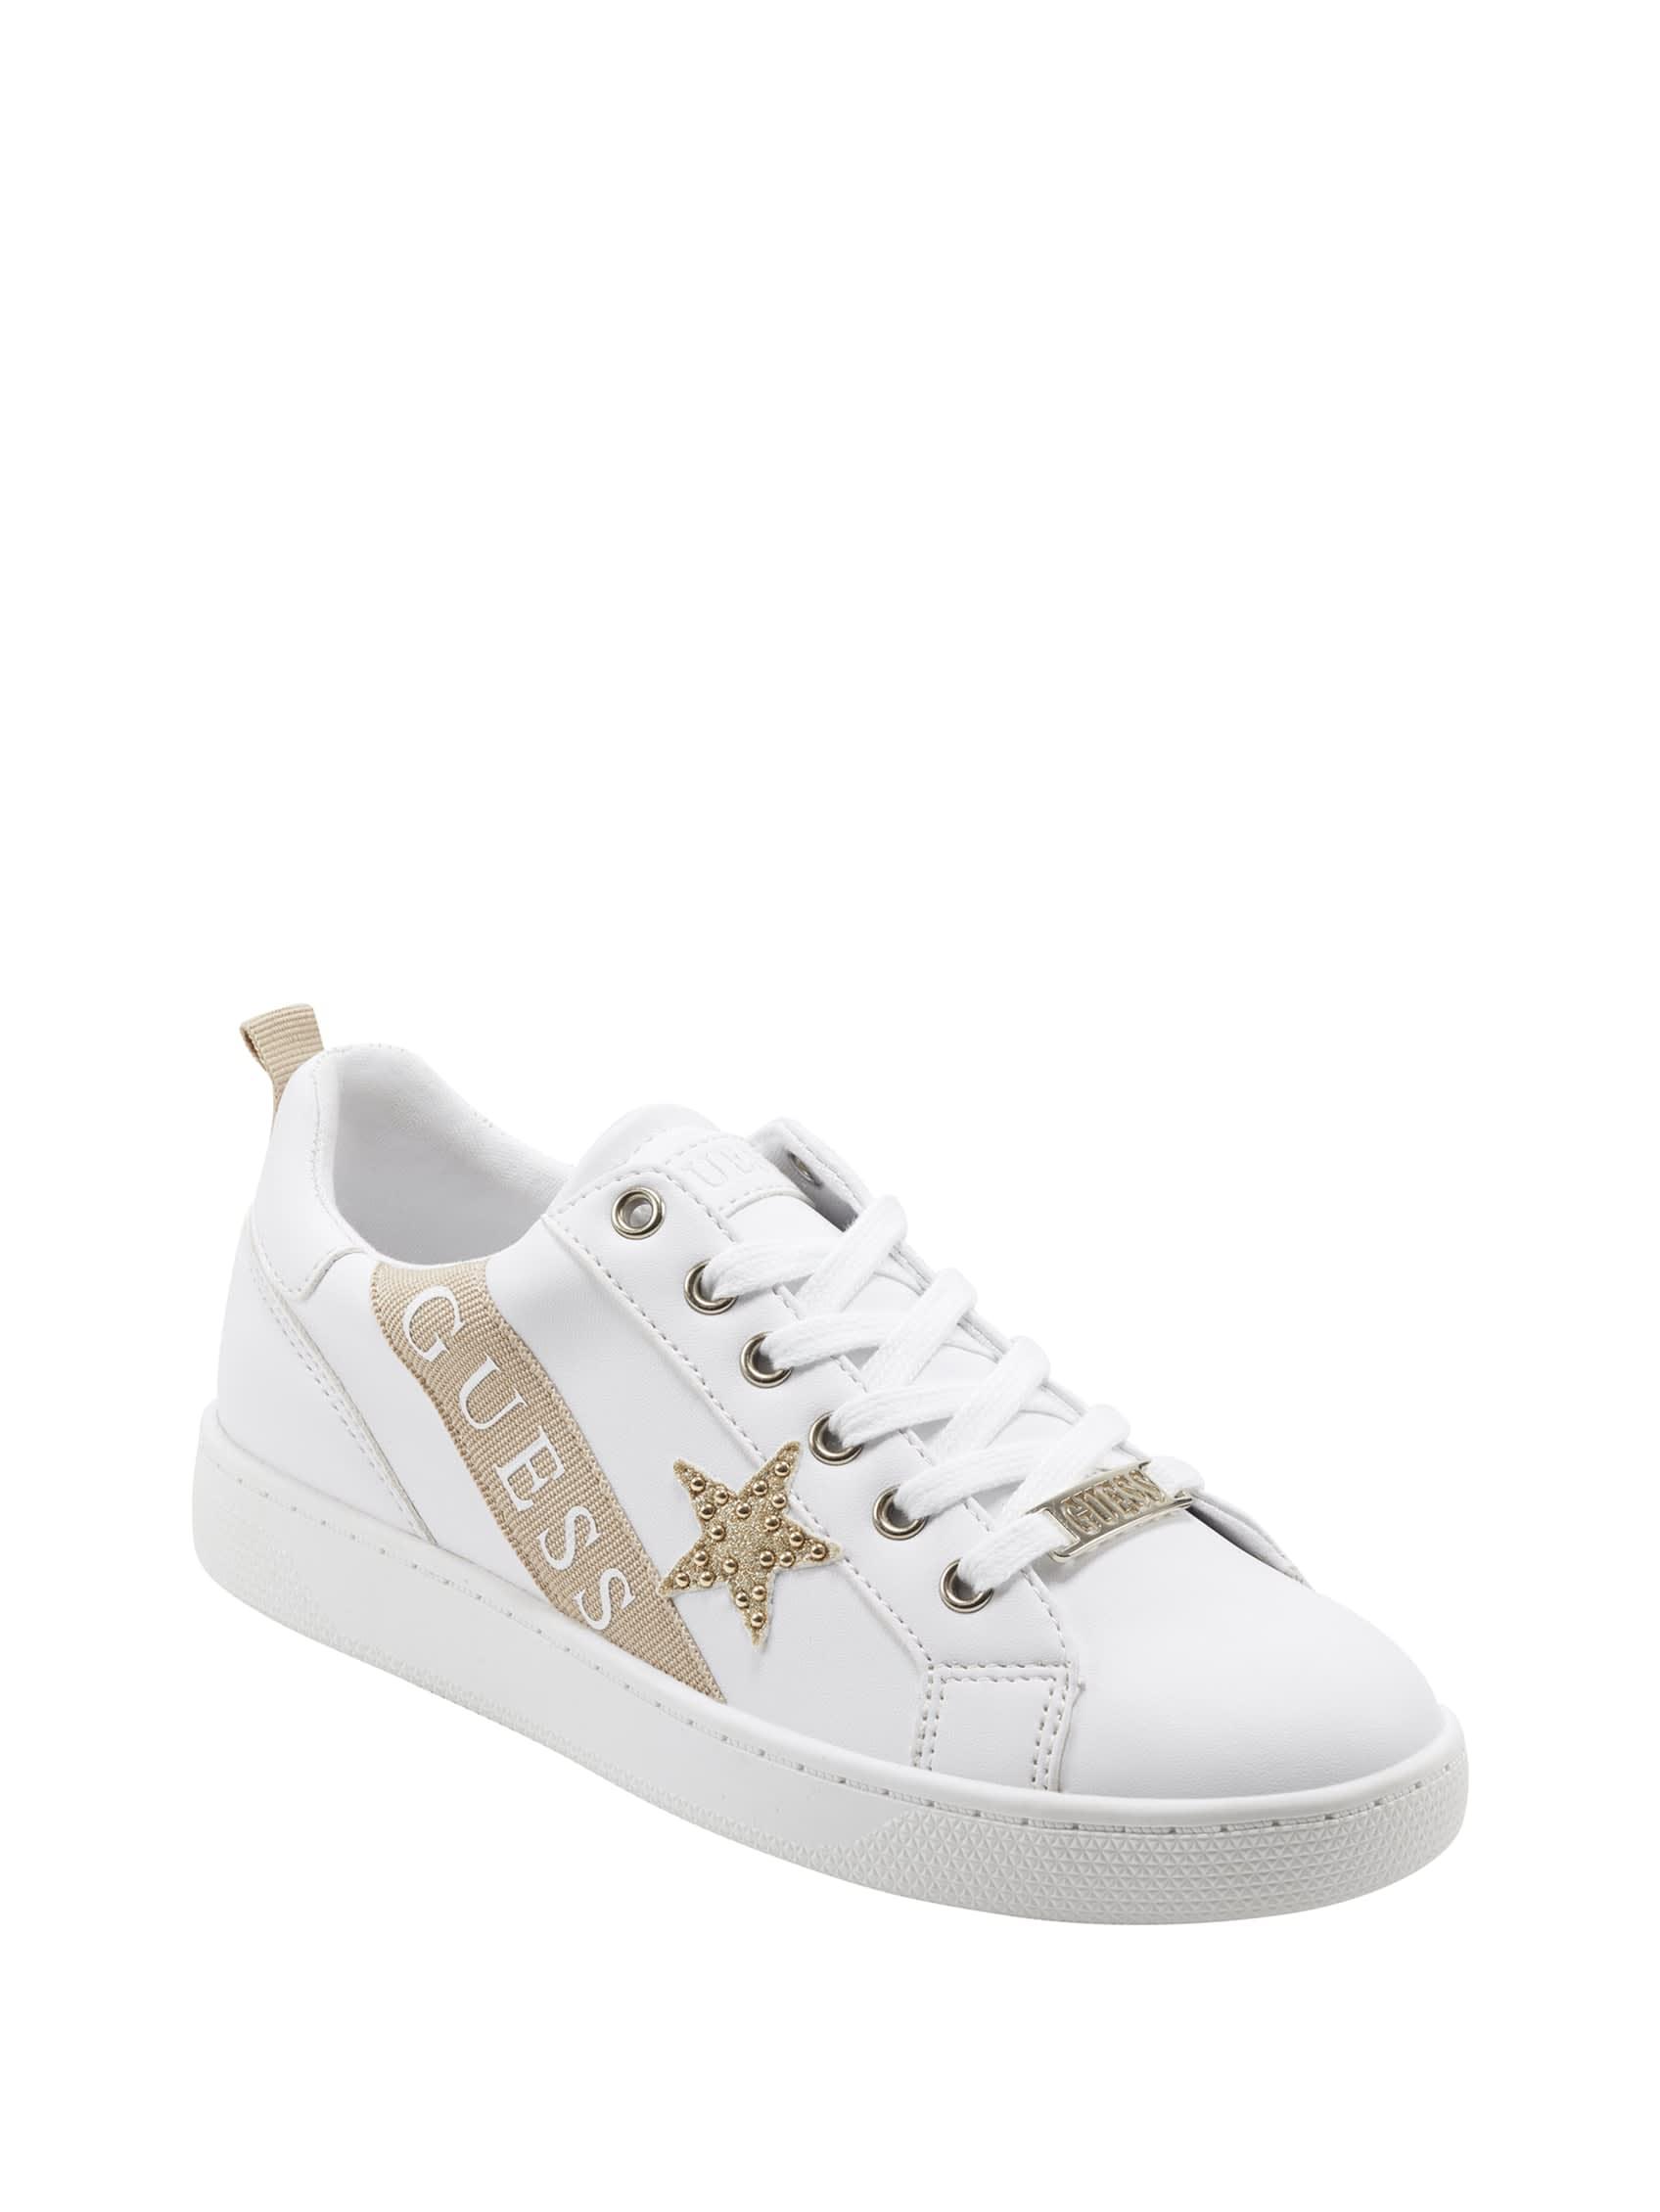 Guess Factory Risley Logo Star Sneakers in White | Lyst